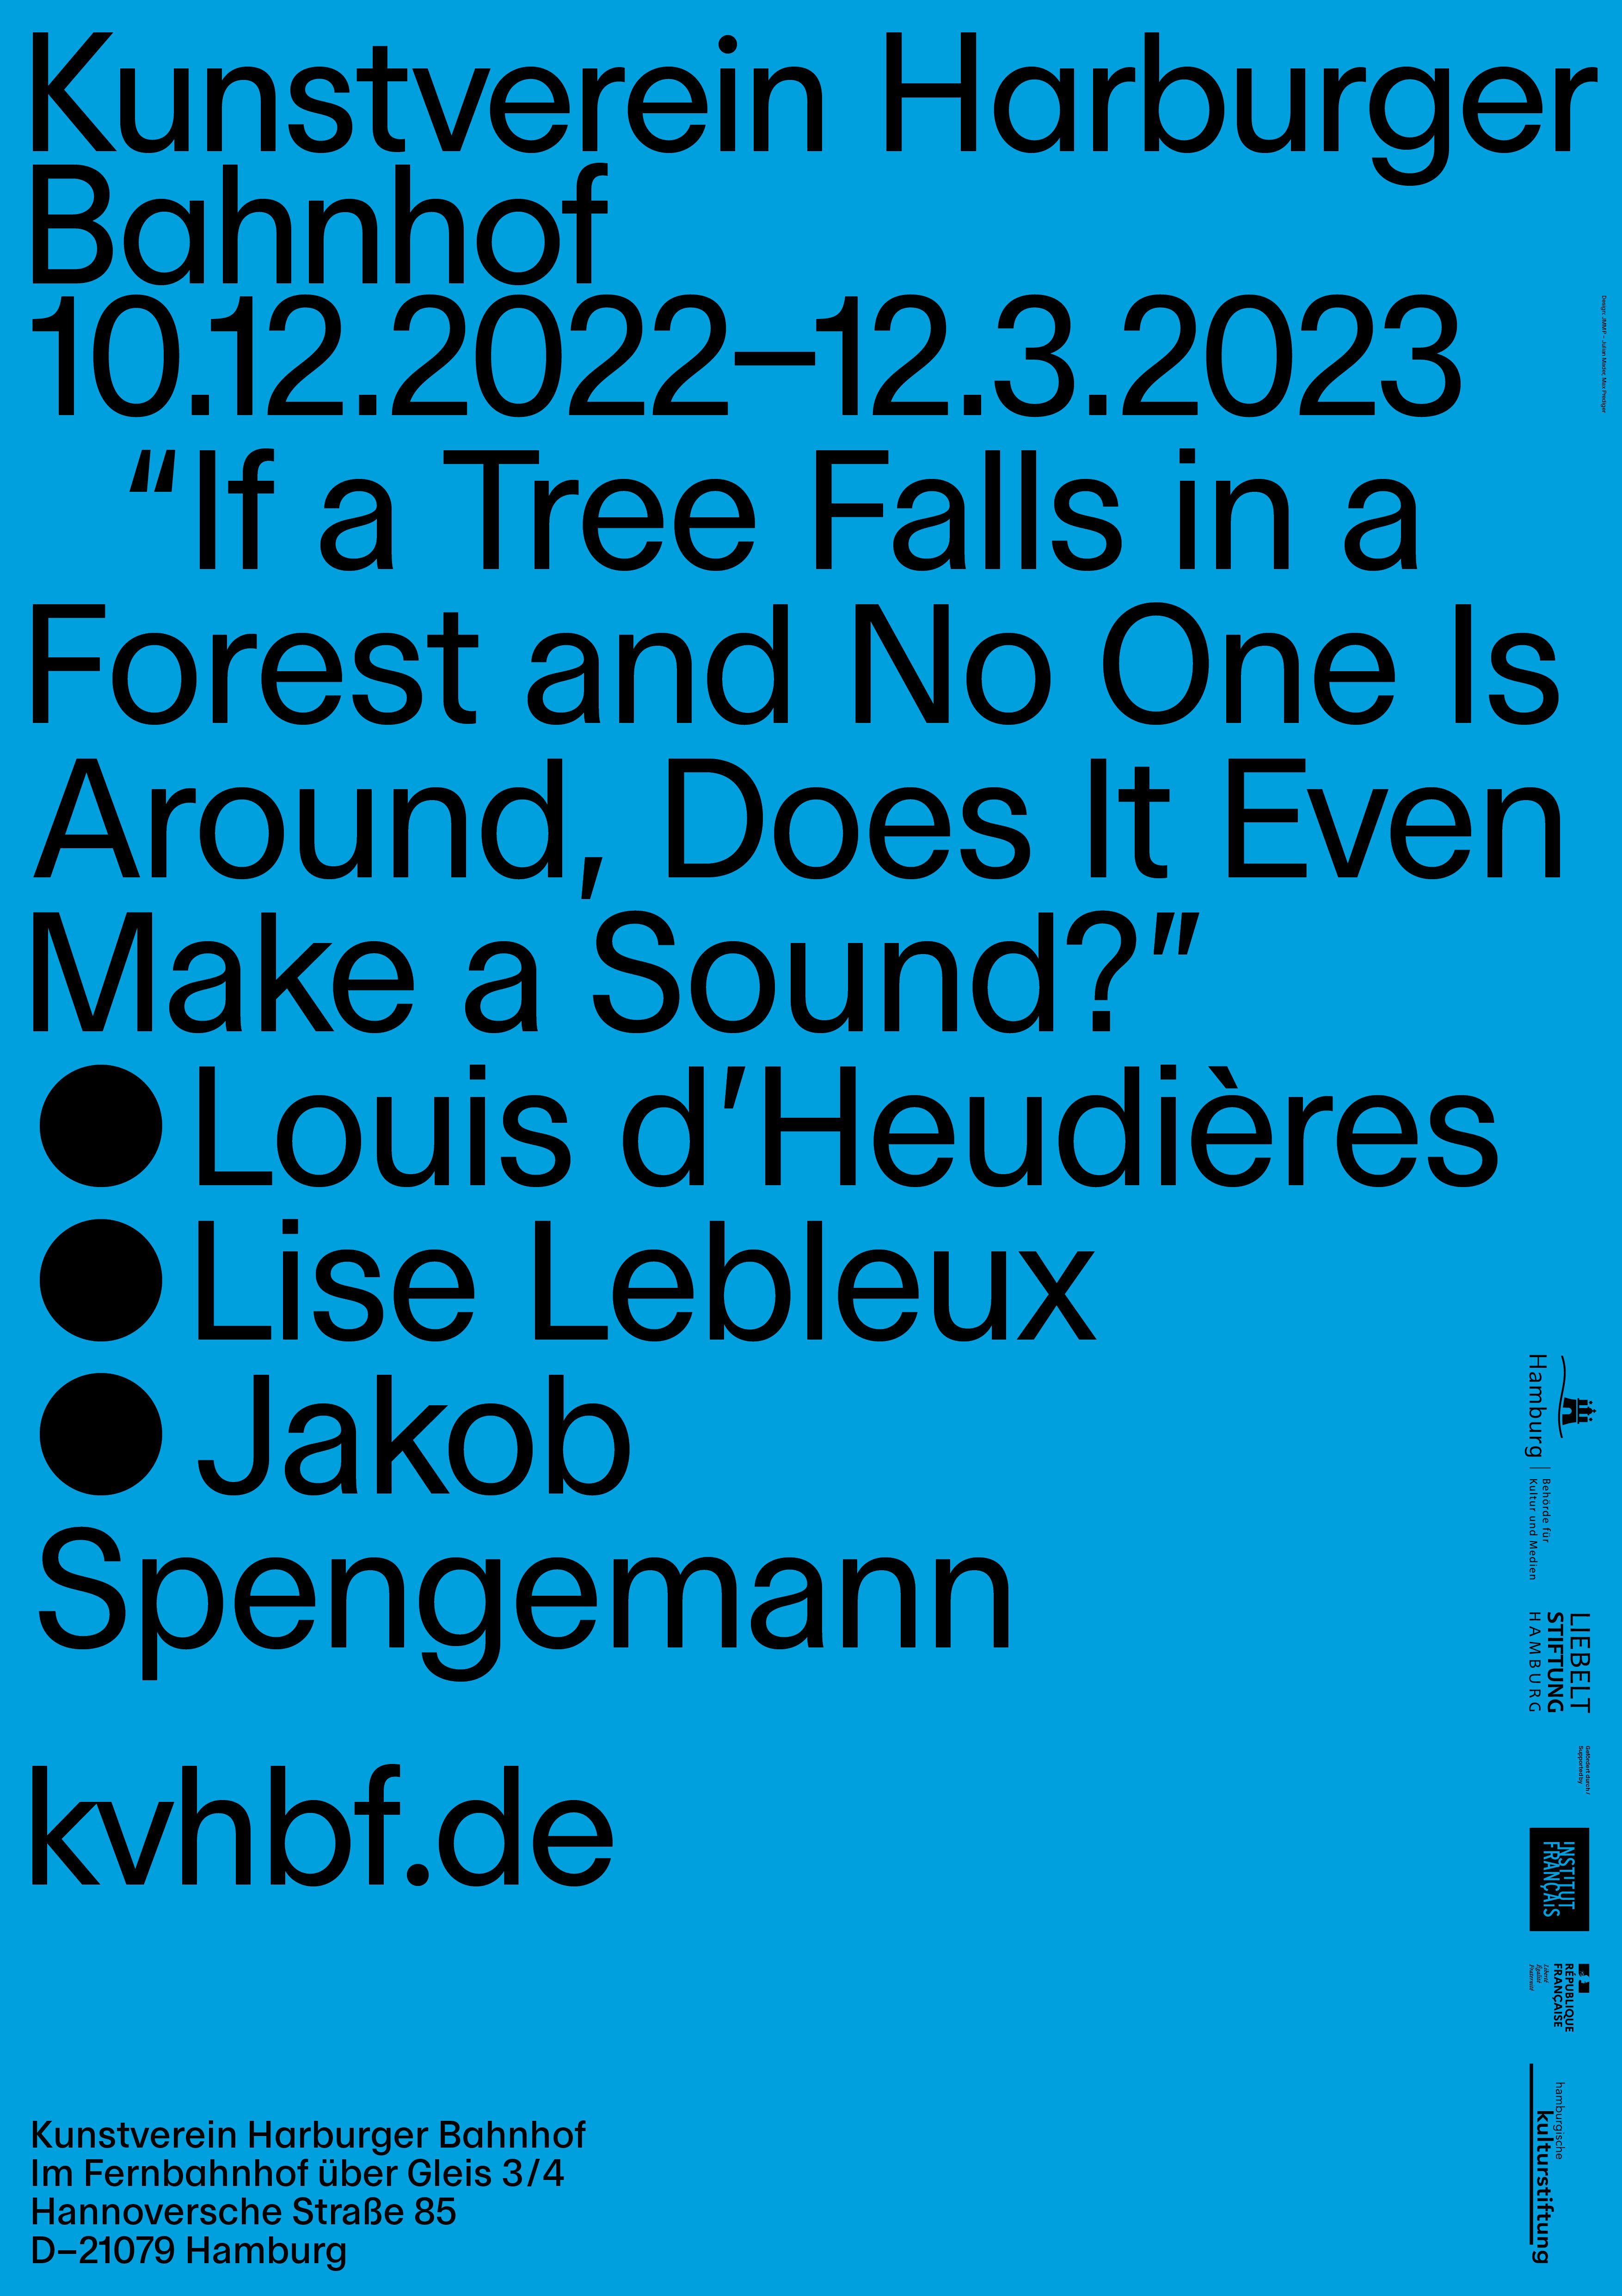 KvHBf If a Tree Falls in a Forest Plakat 02 MP1 Eröffnung: If a Tree Falls in a Forest and No One Is Around, Does It Even Make a Sound?